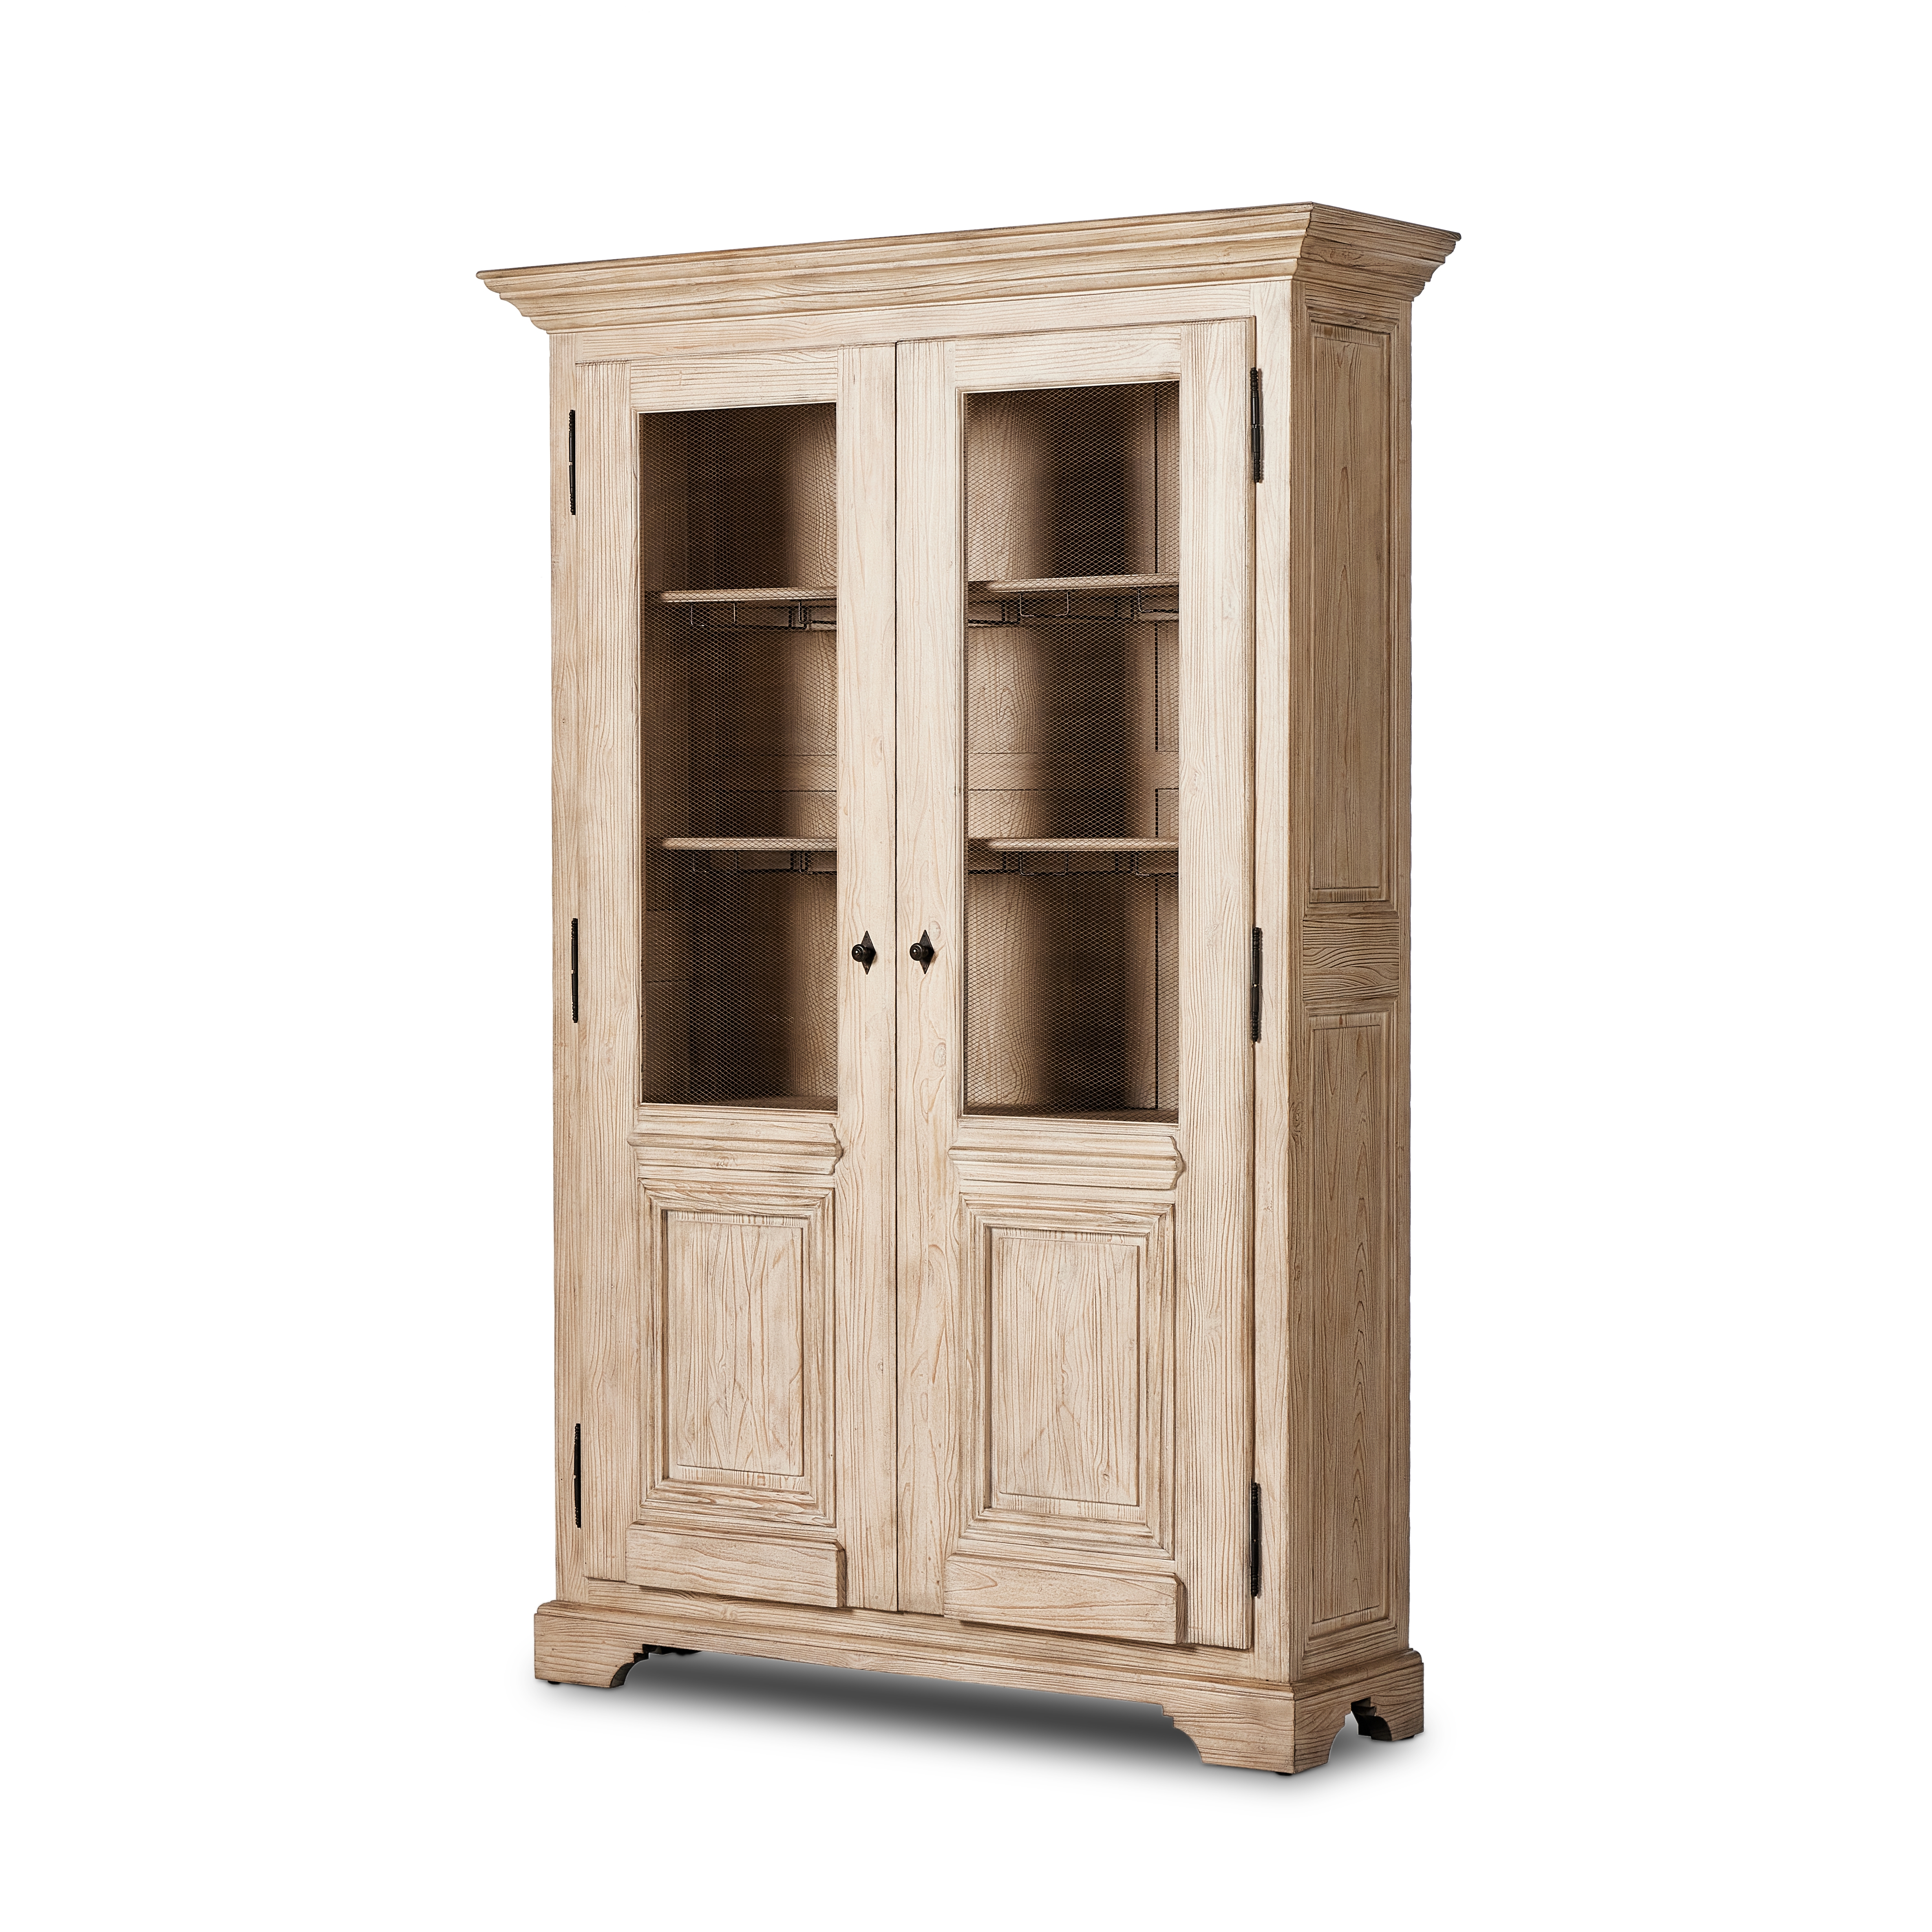 The "please No More Doors" Cabinet-Ntrl - Image 0